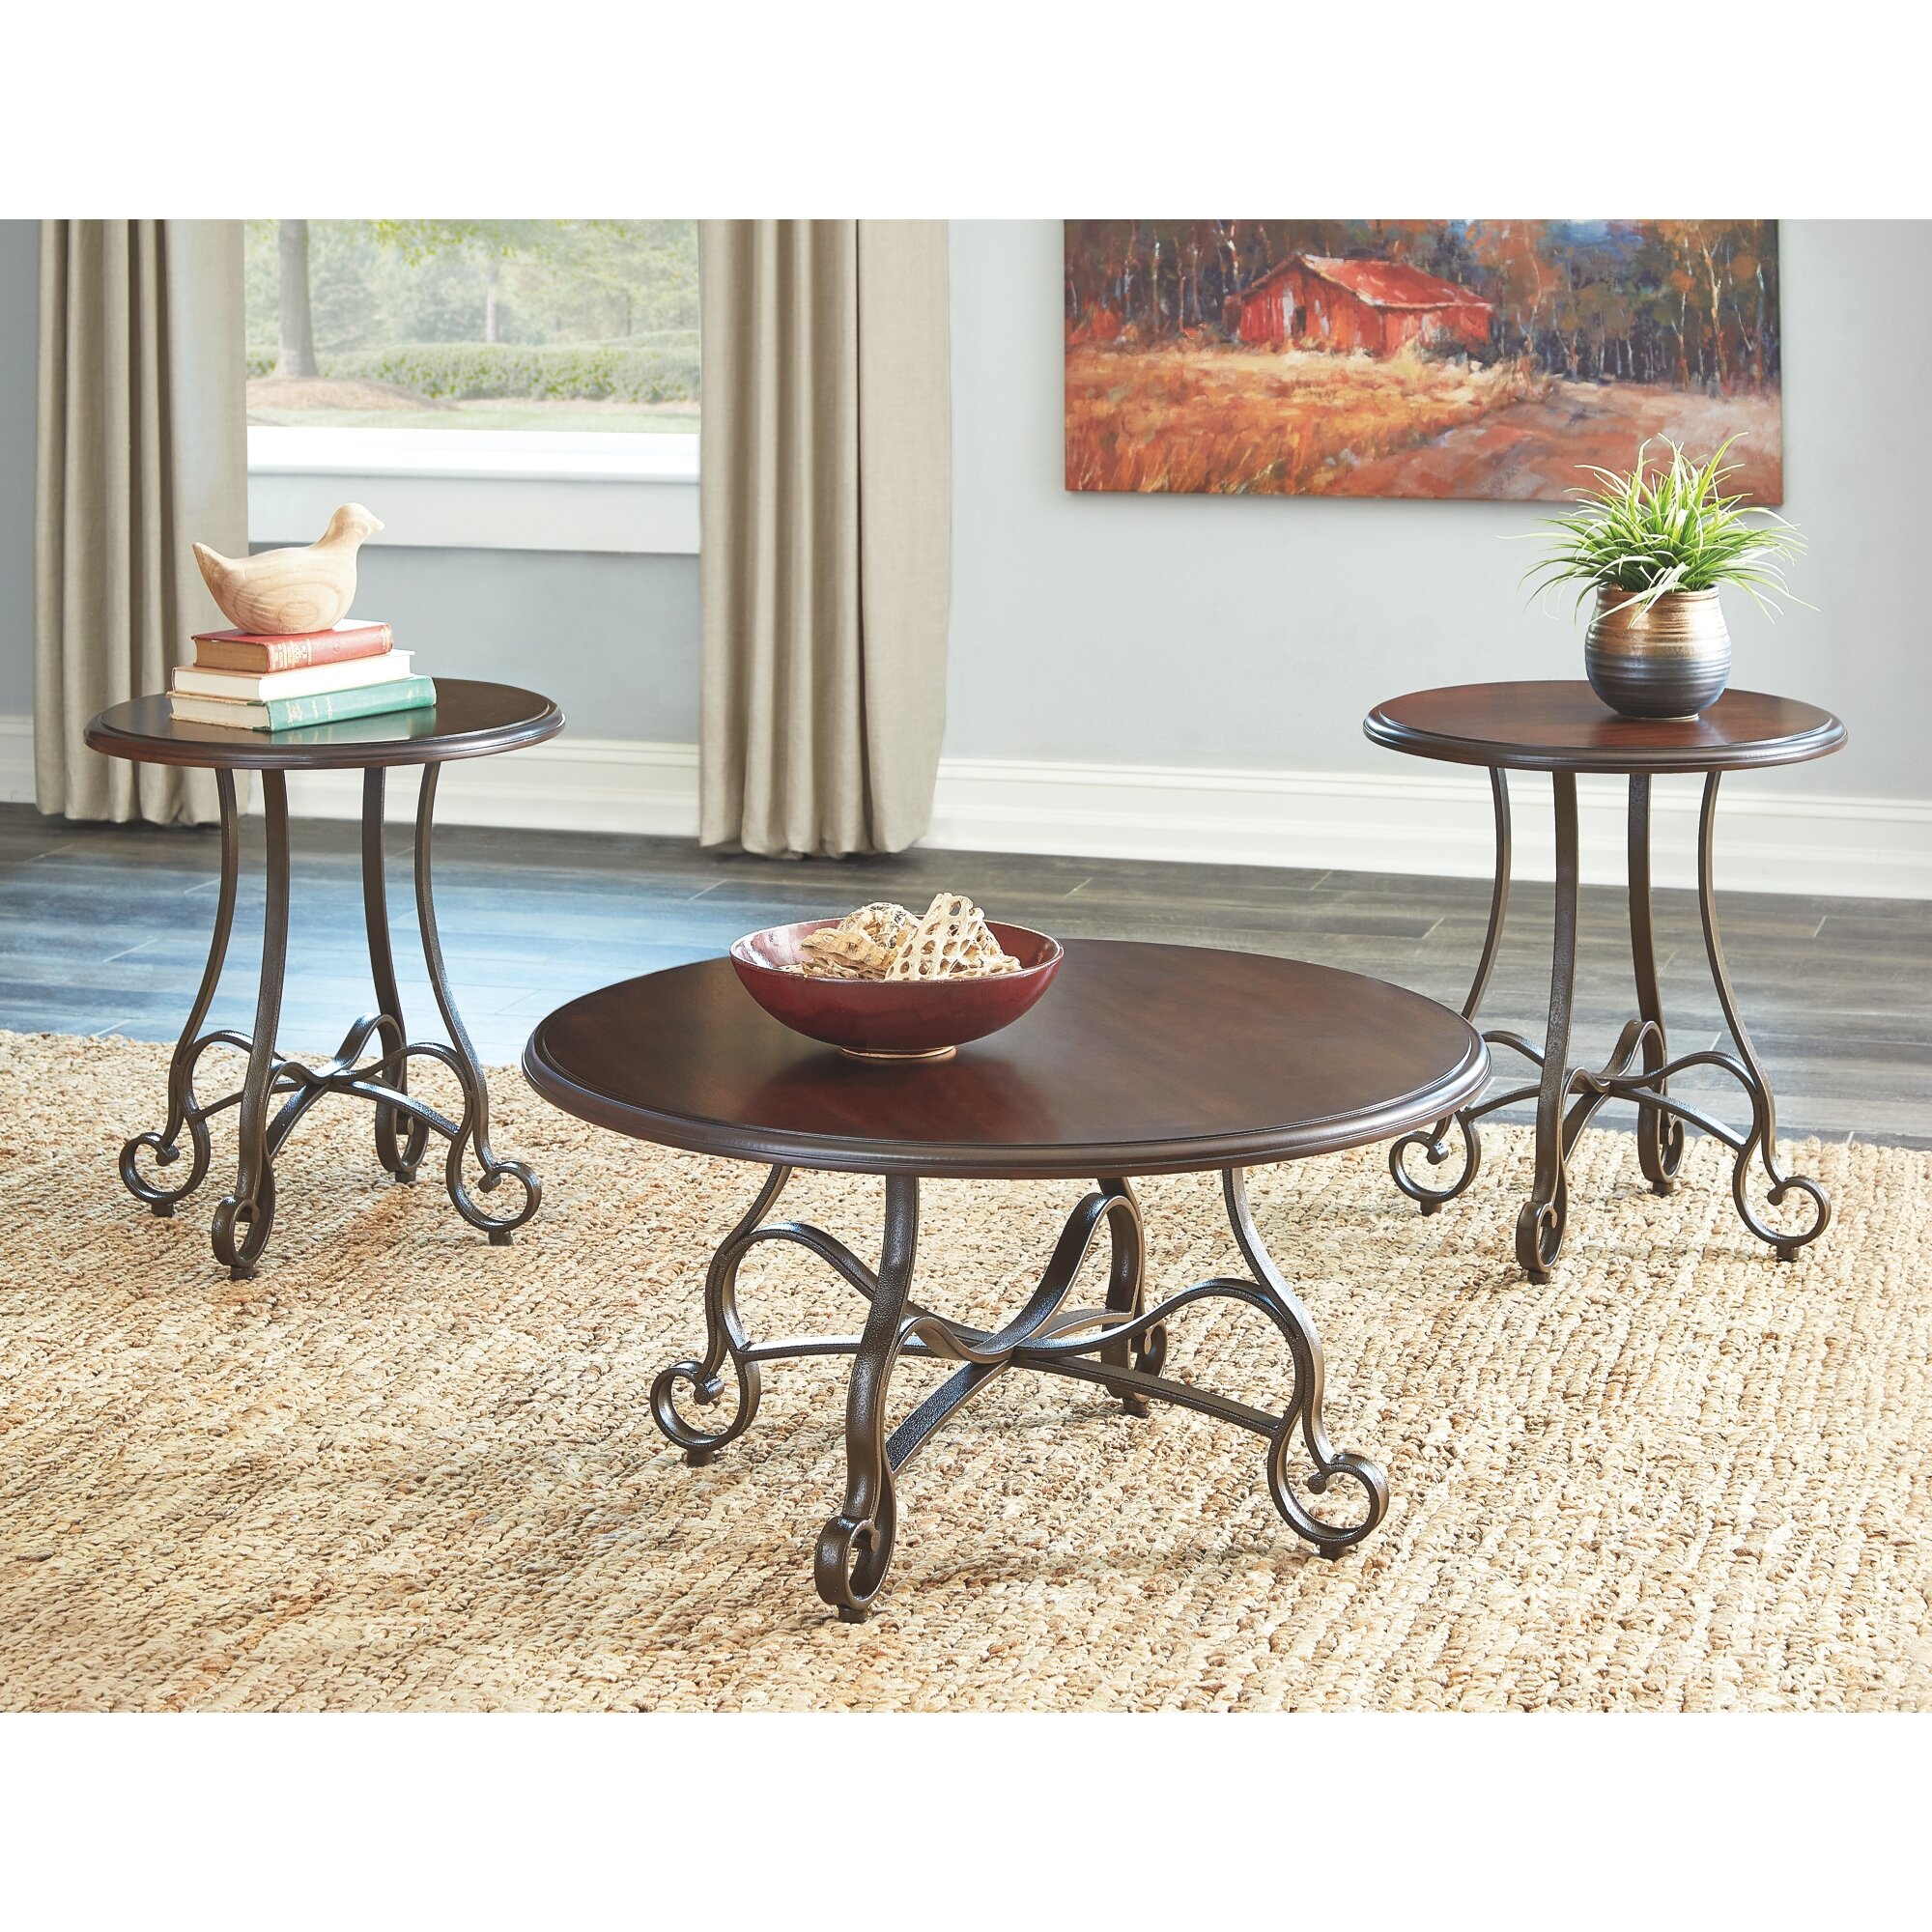 Swell Round Coffee Table In 2020 Coffee Table Small Space Coffee Table Round Coffee Table